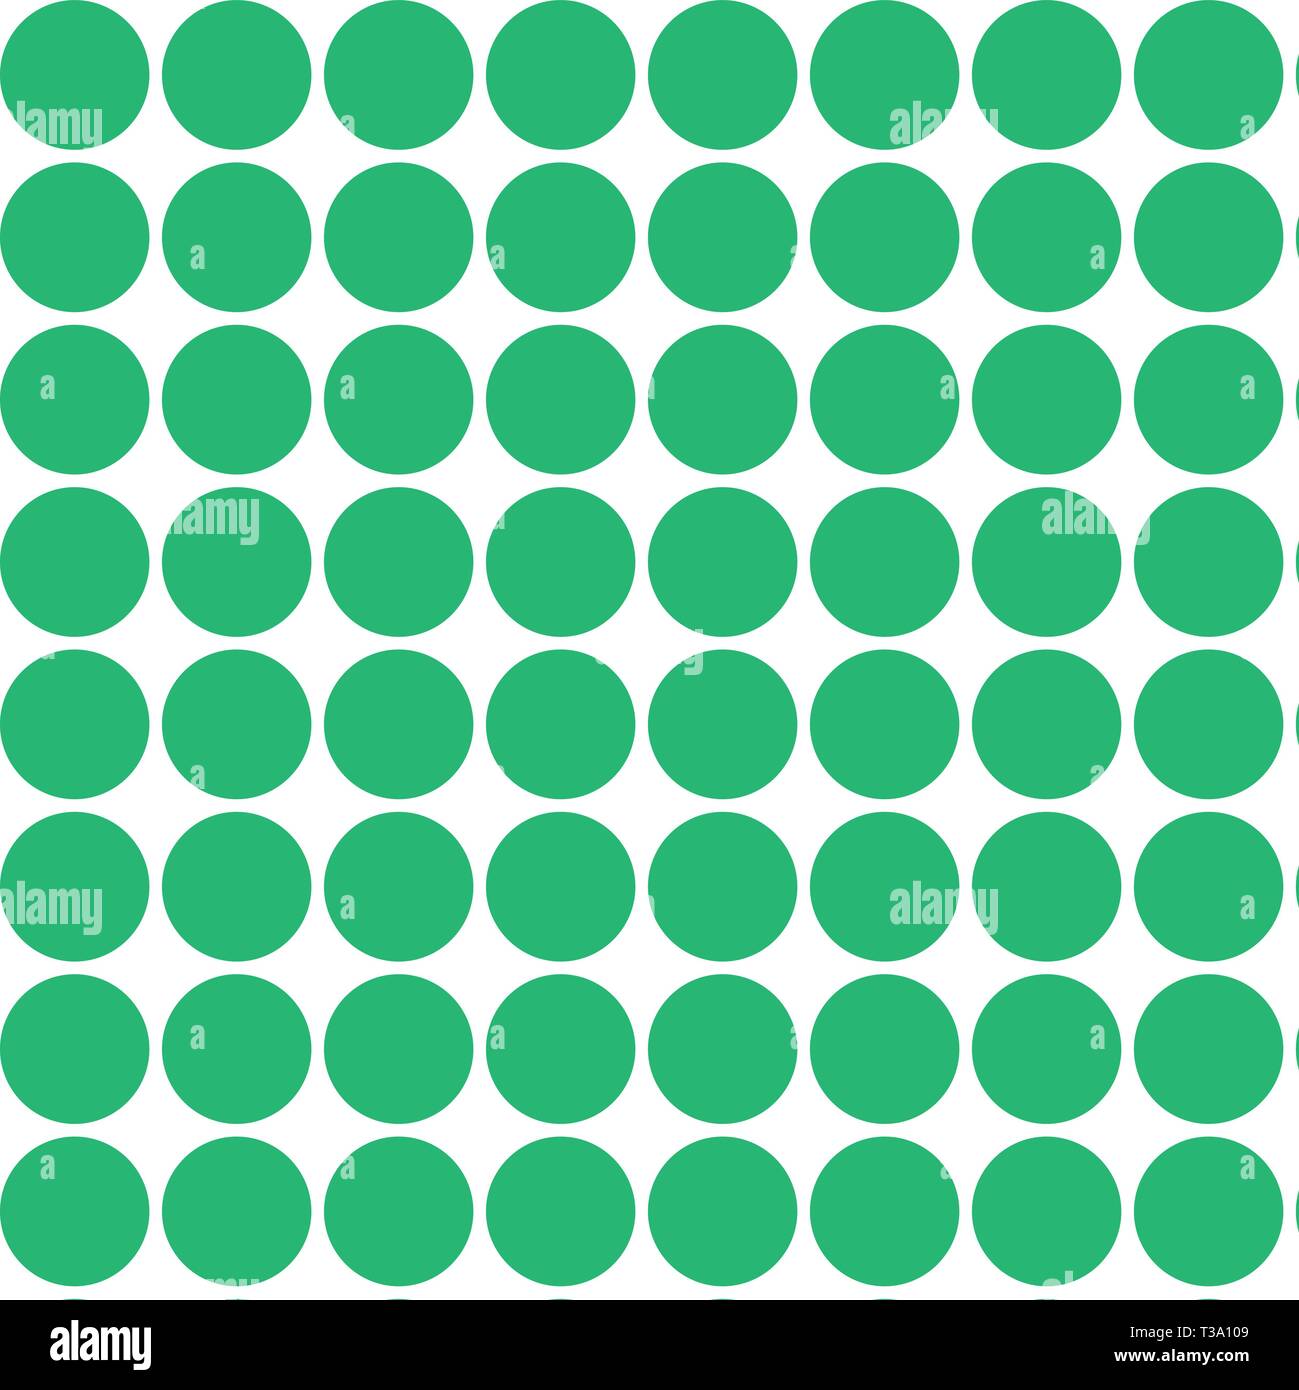 Seamless Green Circles Arranged in Rows and Columns on White Flat Pattern Design business Empty template isolated Minimalist graphic layout template f Stock Vector